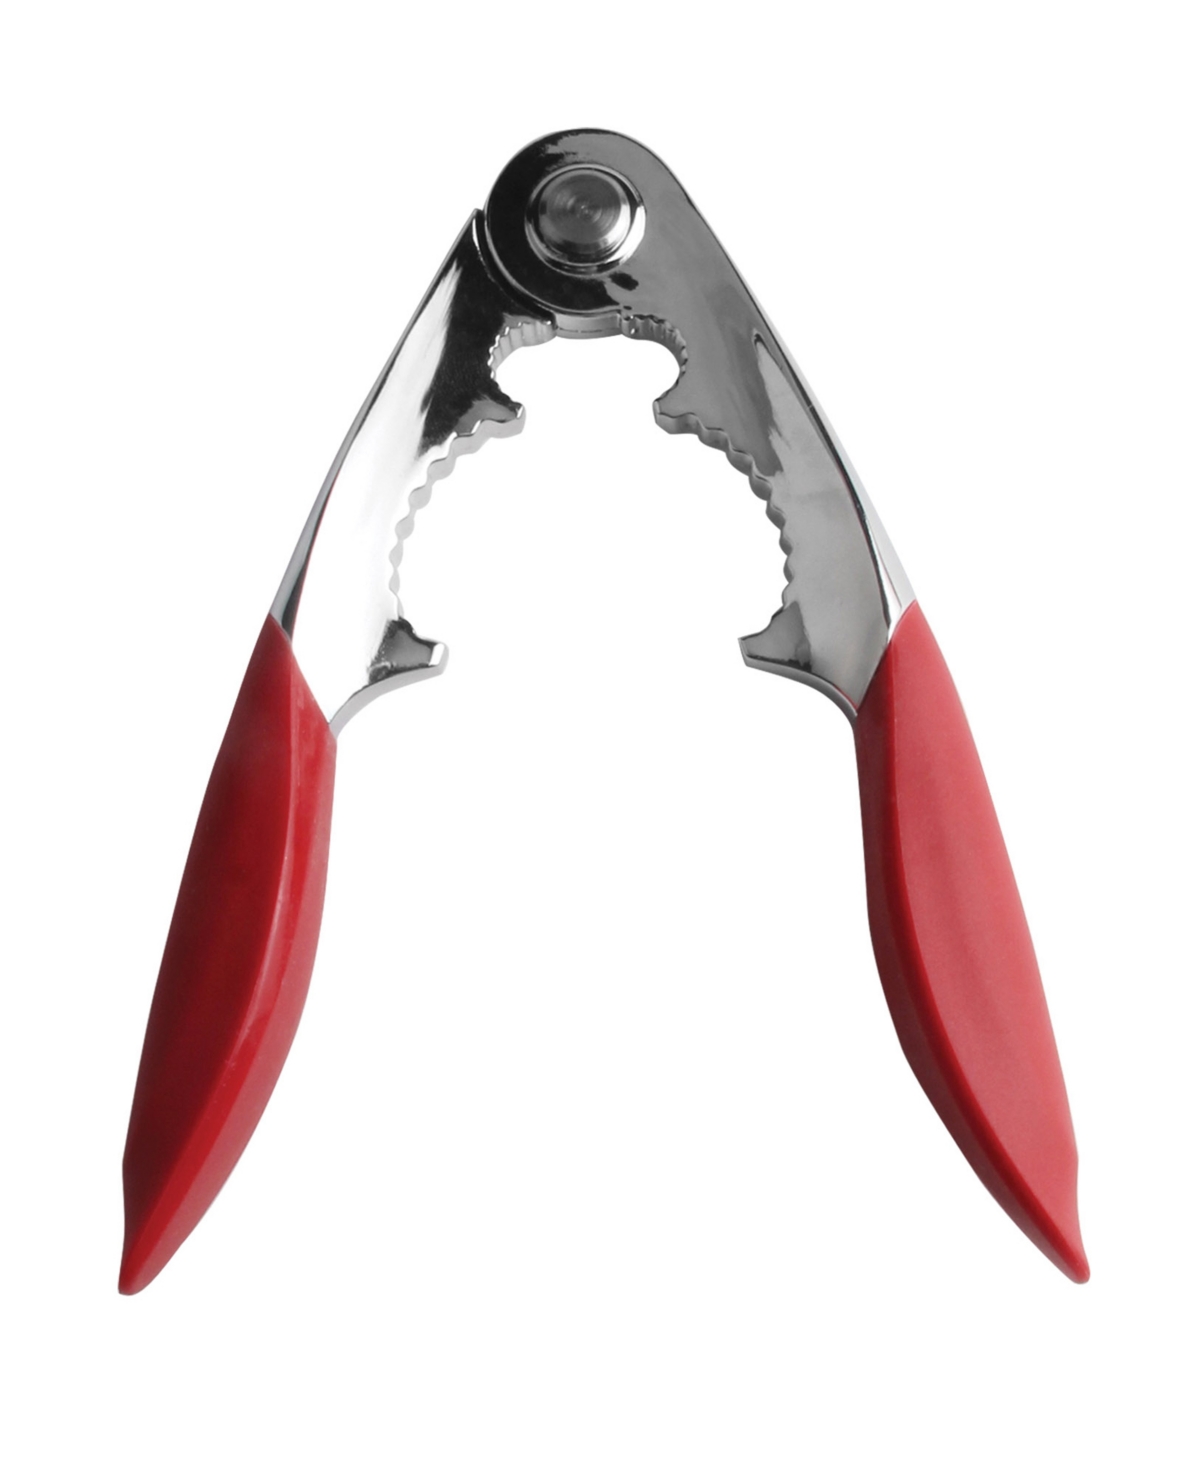 Maine Man Seafood Maine Man Spring-action Lobster Tool, Chrome-plated Zinc Alloy And Silicone In Red